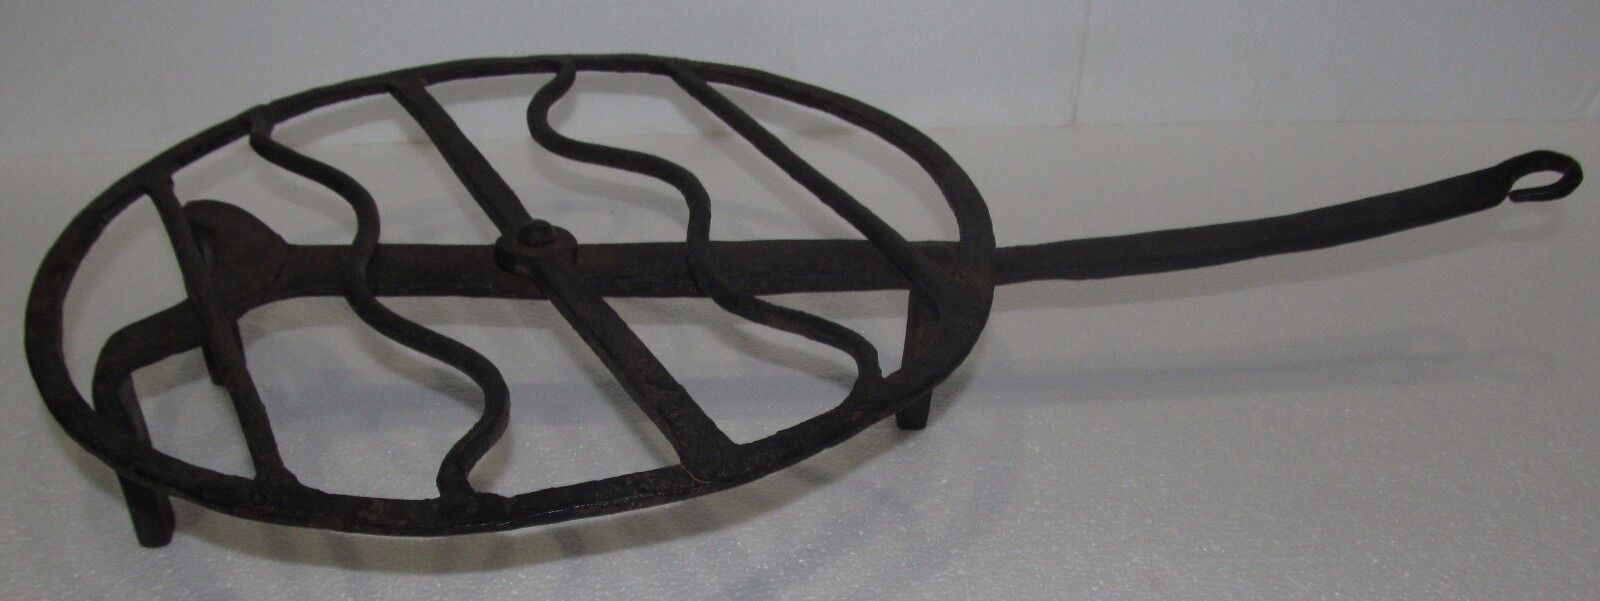 18TH CENTURY WROUGHT IRON ROTATING ANTIQUE ROASTER WITH RAT TAILED HANDLE